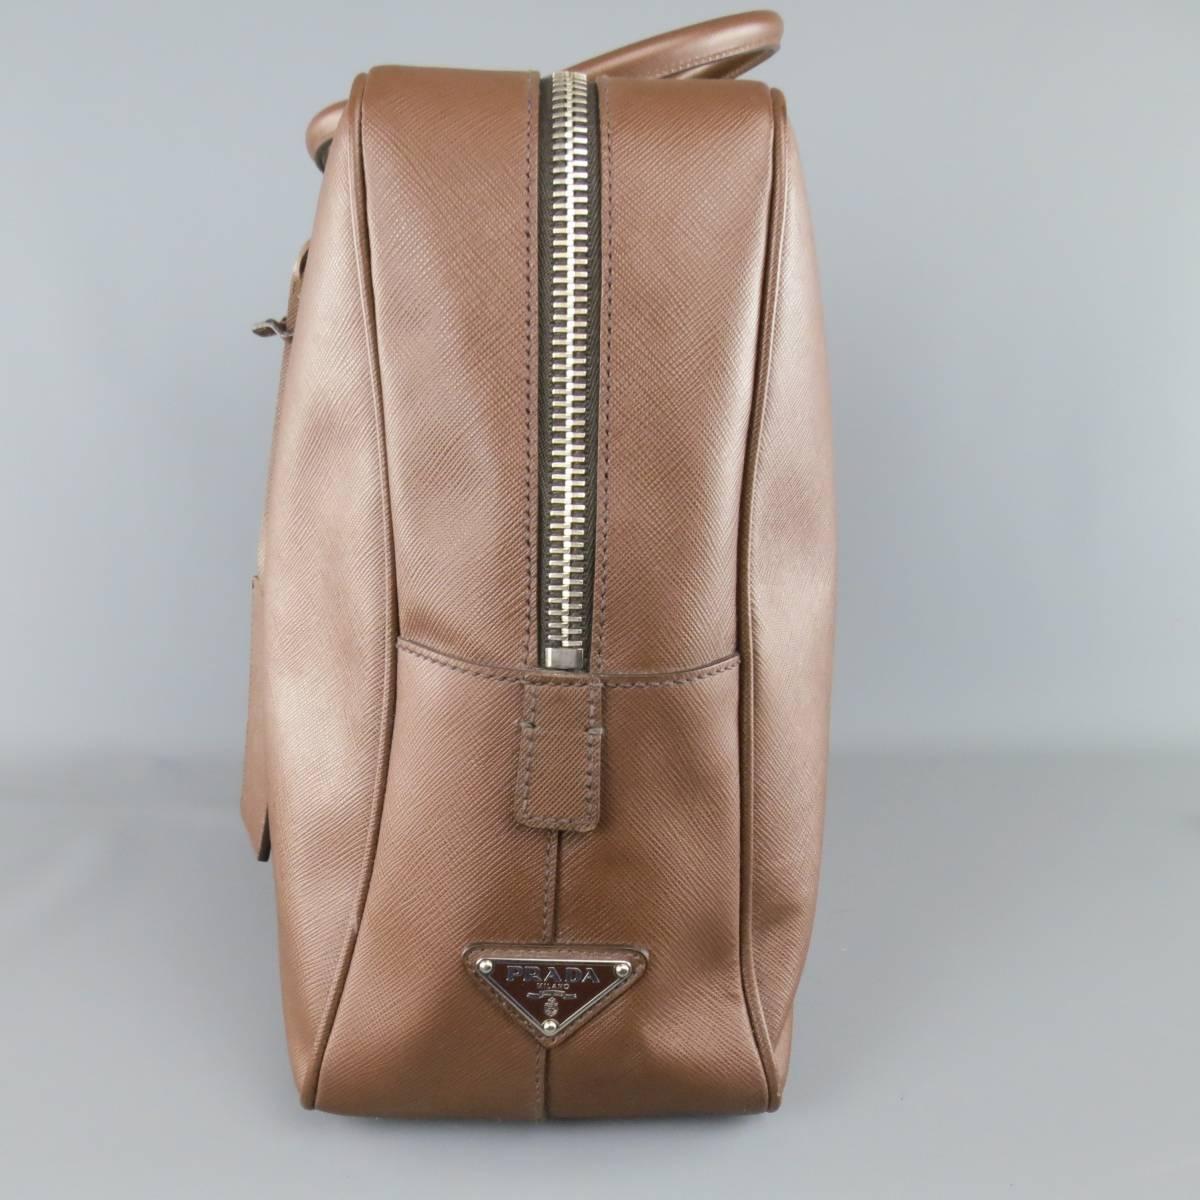 Classic rectangular PRADA briefcase in a light brown Seffiano textured leather featuring a thick silver tone zip top closure with side lock, double covered top handles, luggage tag, and internal storage. Wear throughout. with dust bag. As-Is. Made